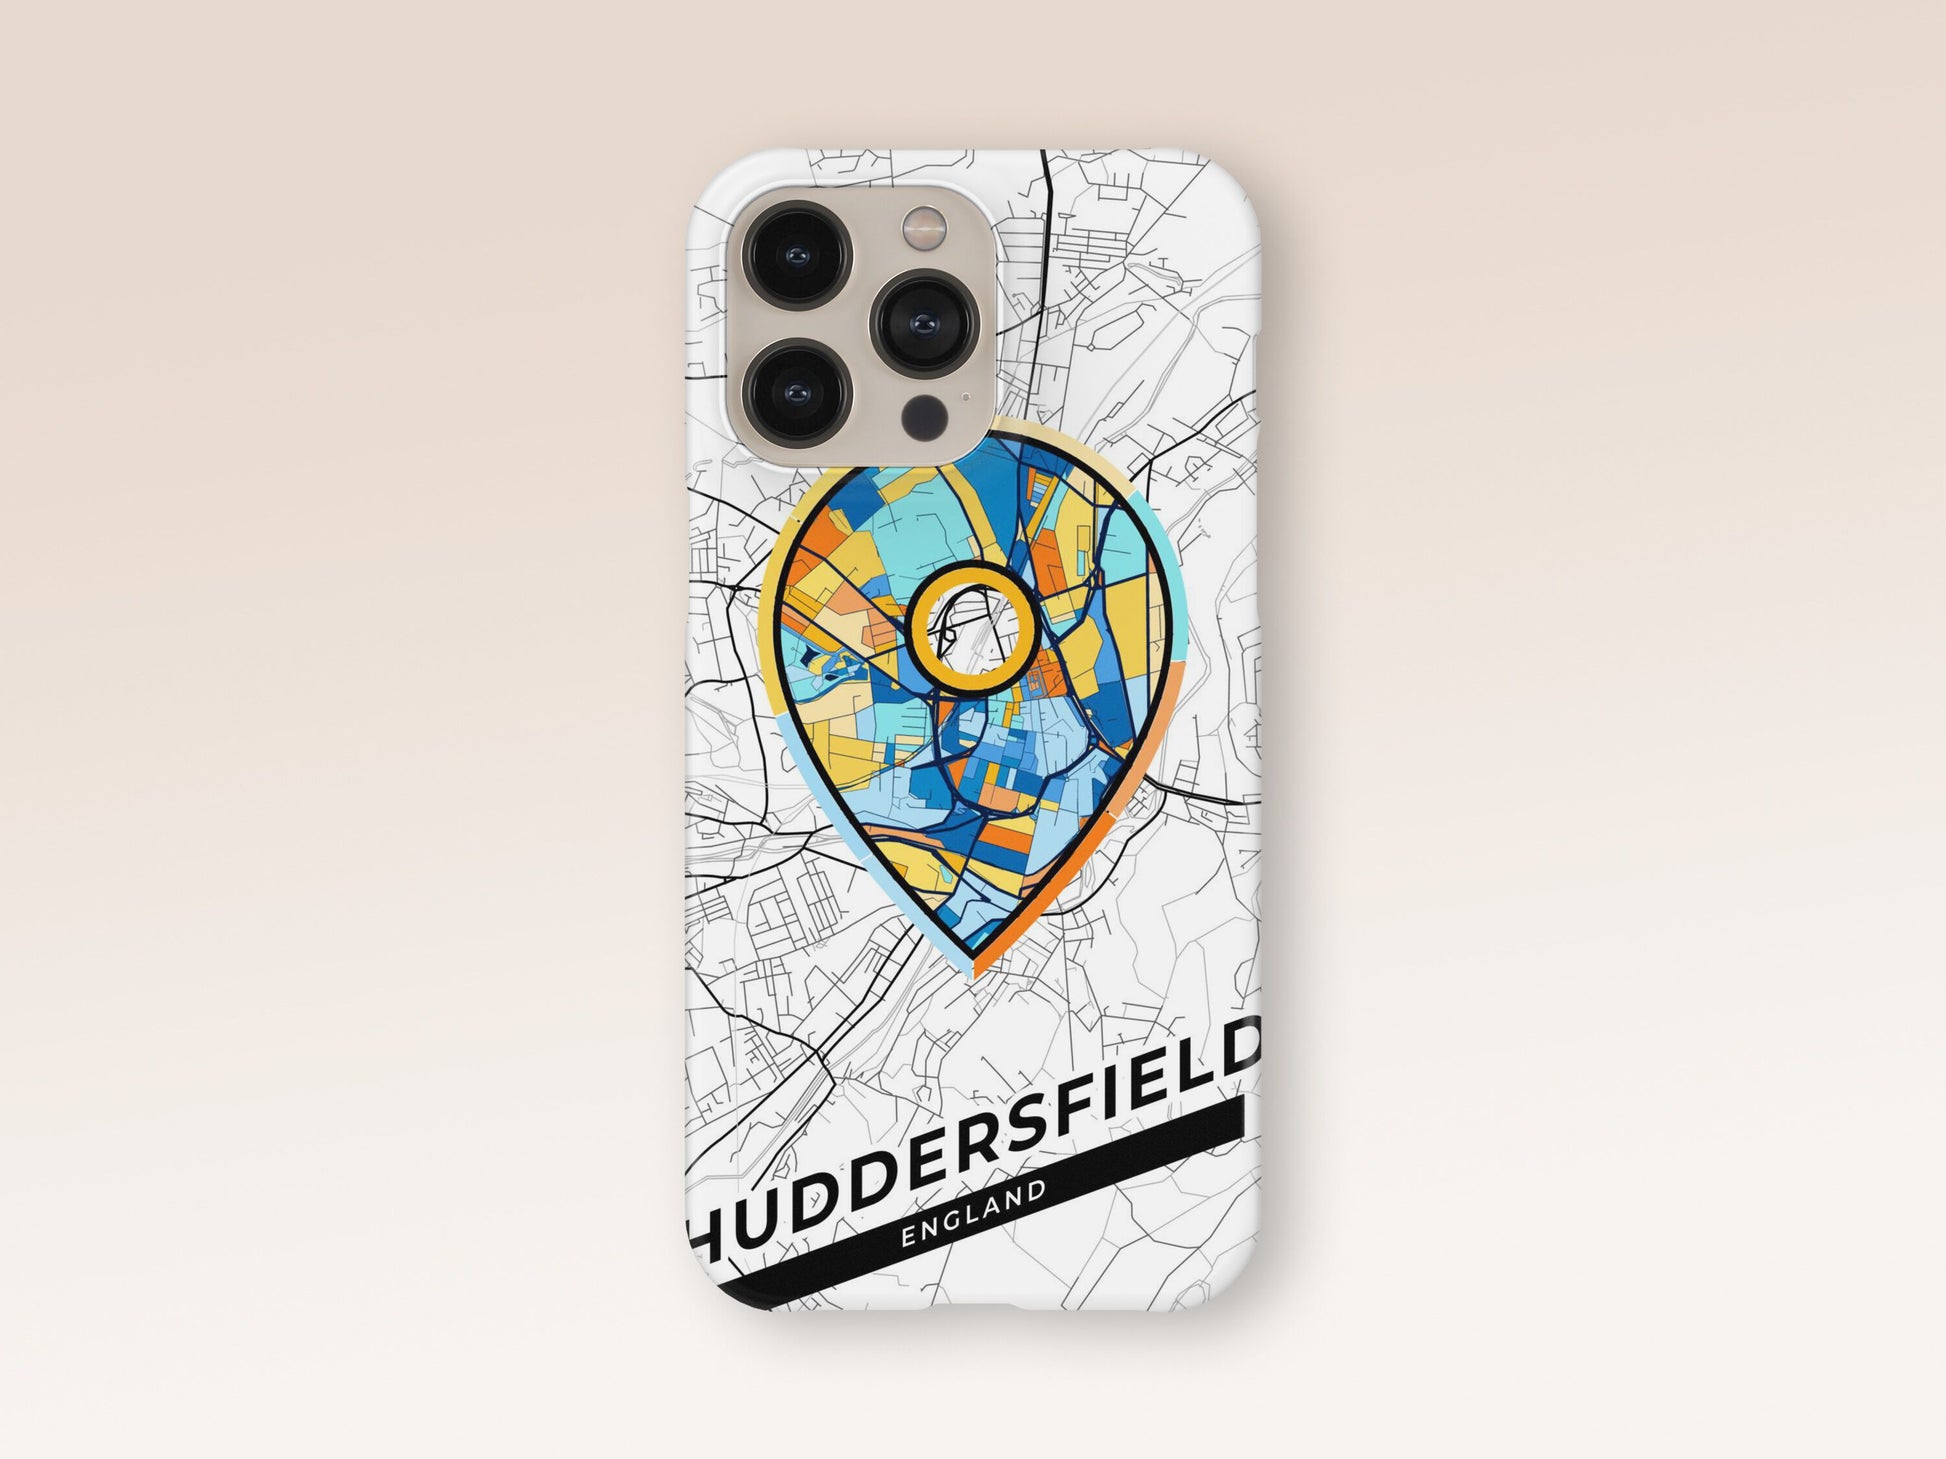 Huddersfield England slim phone case with colorful icon. Birthday, wedding or housewarming gift. Couple match cases. 1